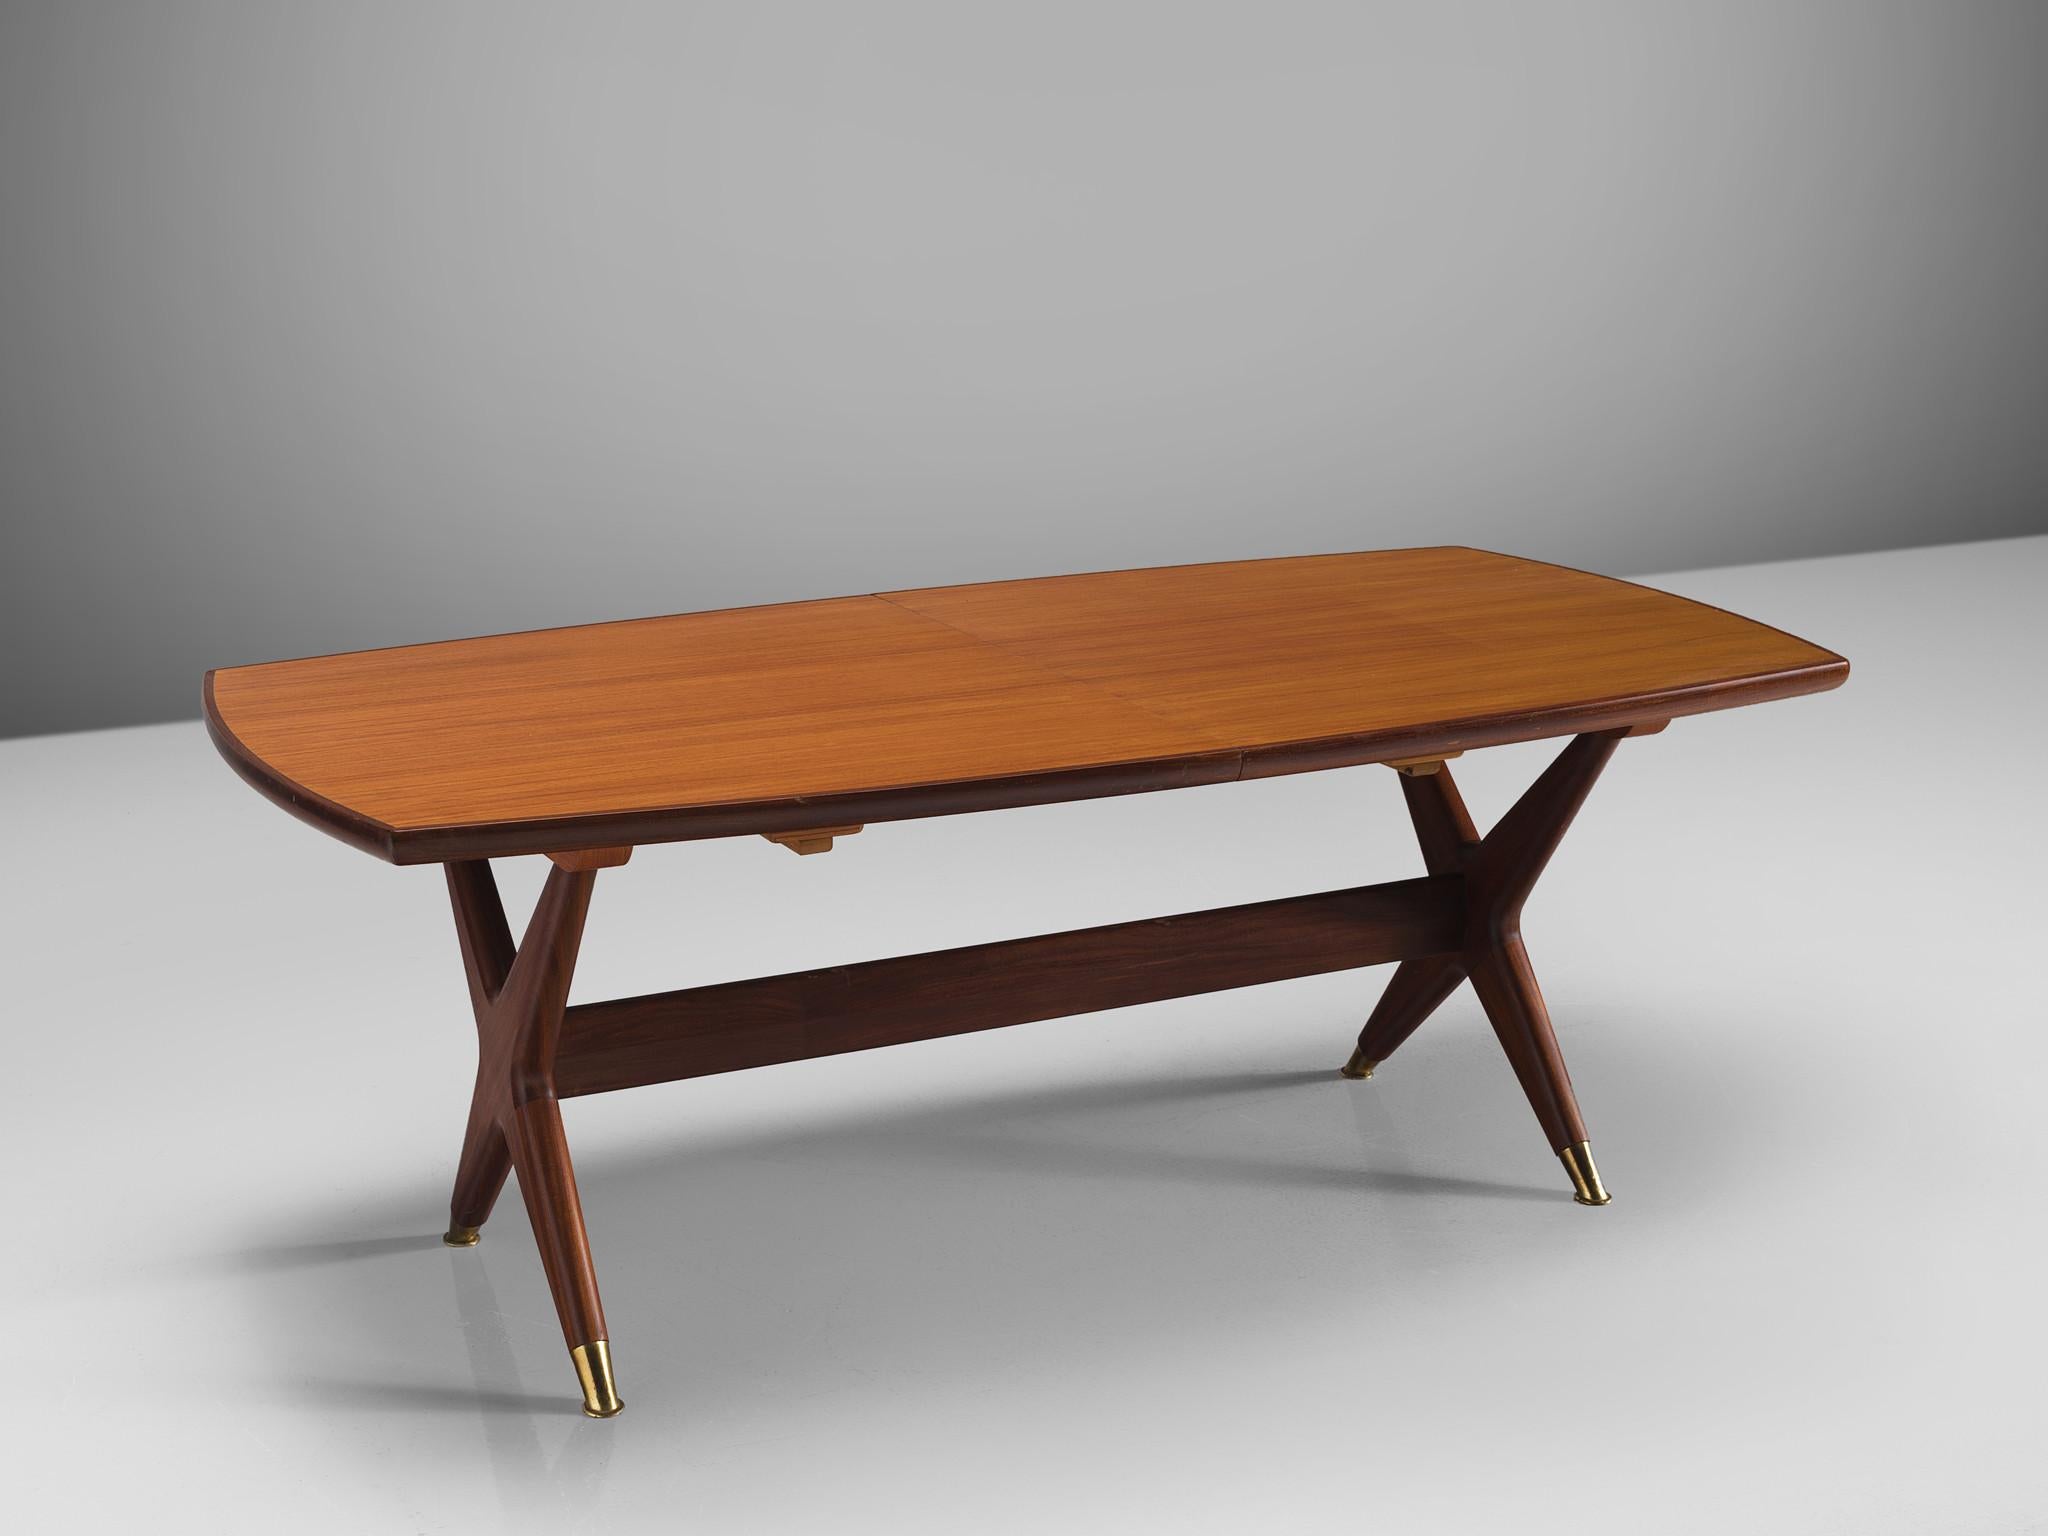 Fredrik A. Kayser 'Captains' Extendable Dining Table in Teak and Mahogany 1